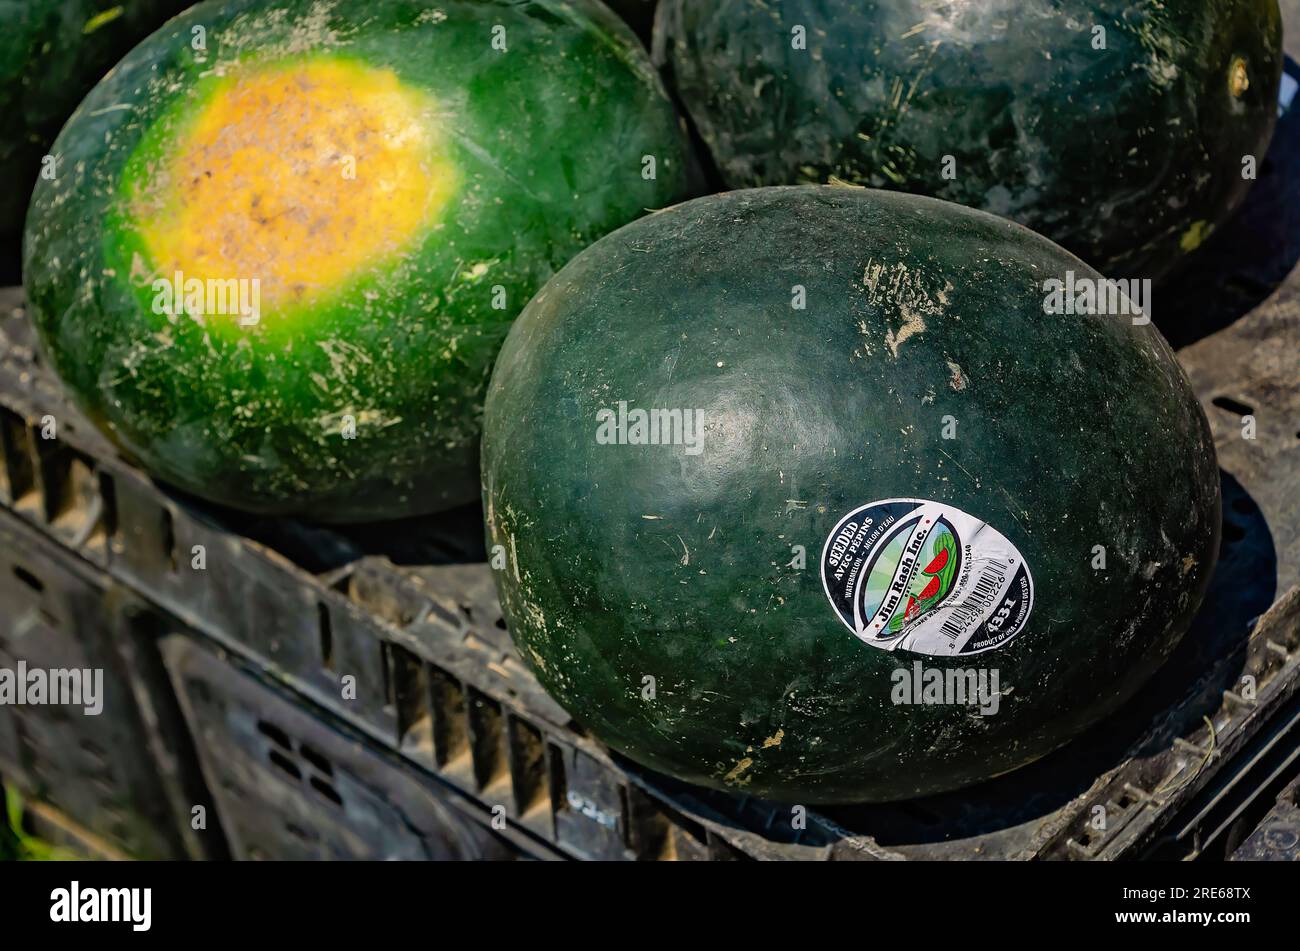 Sugar Baby watermelons are displayed at a farmstand, June 27, 2023, in Mobile, Alabama. Watermelon is cultivated throughout the world. Stock Photo